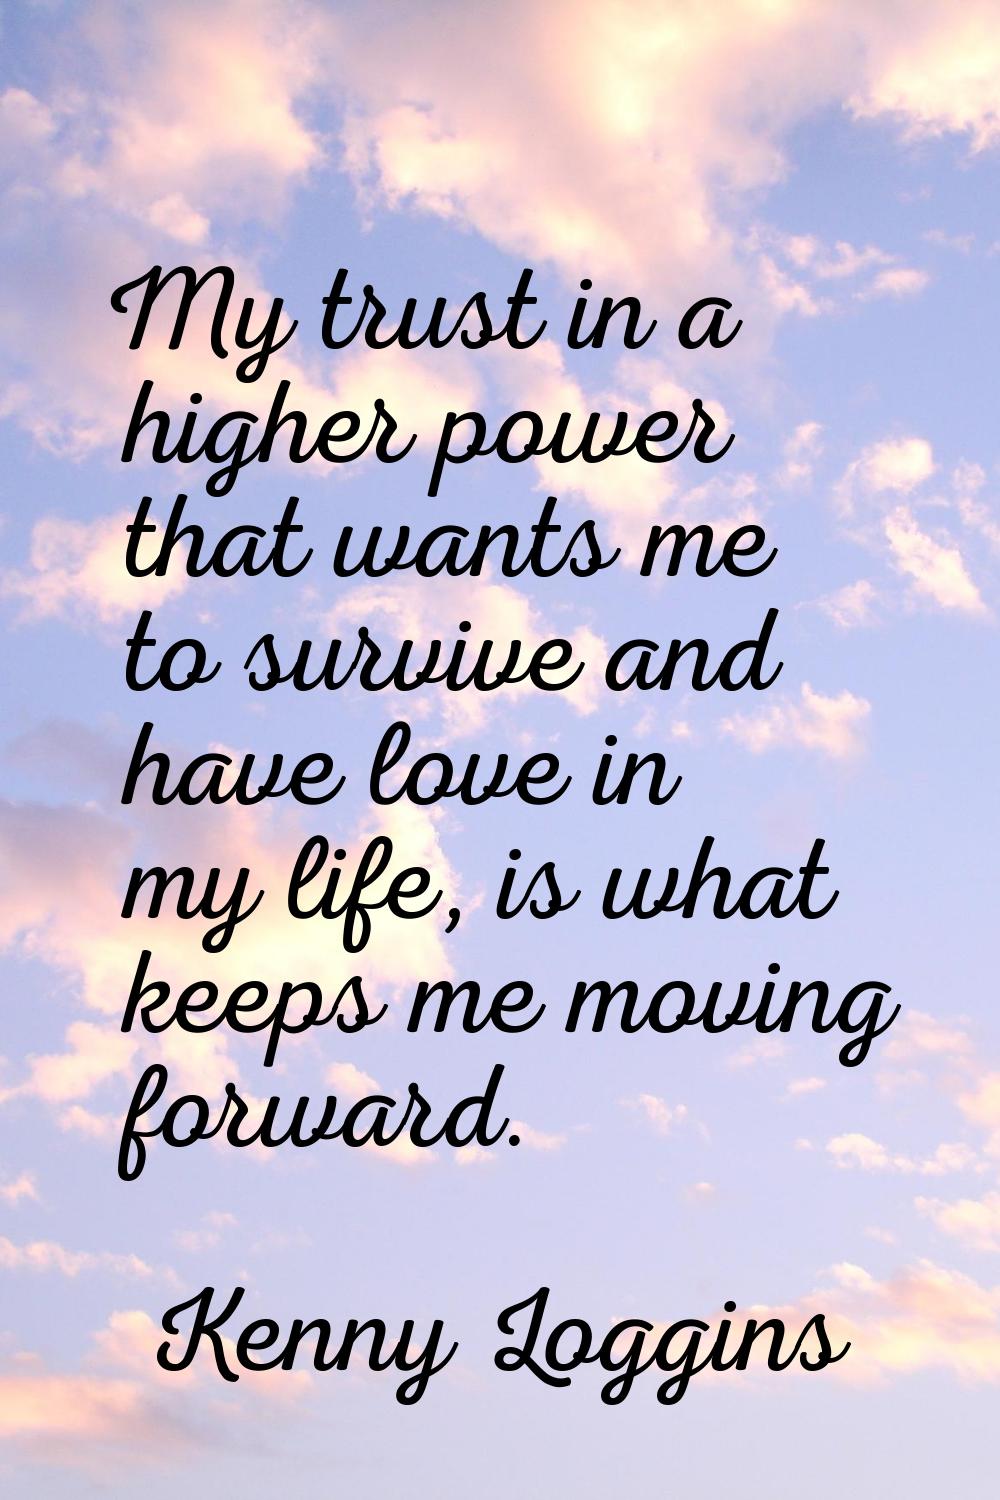 My trust in a higher power that wants me to survive and have love in my life, is what keeps me movi